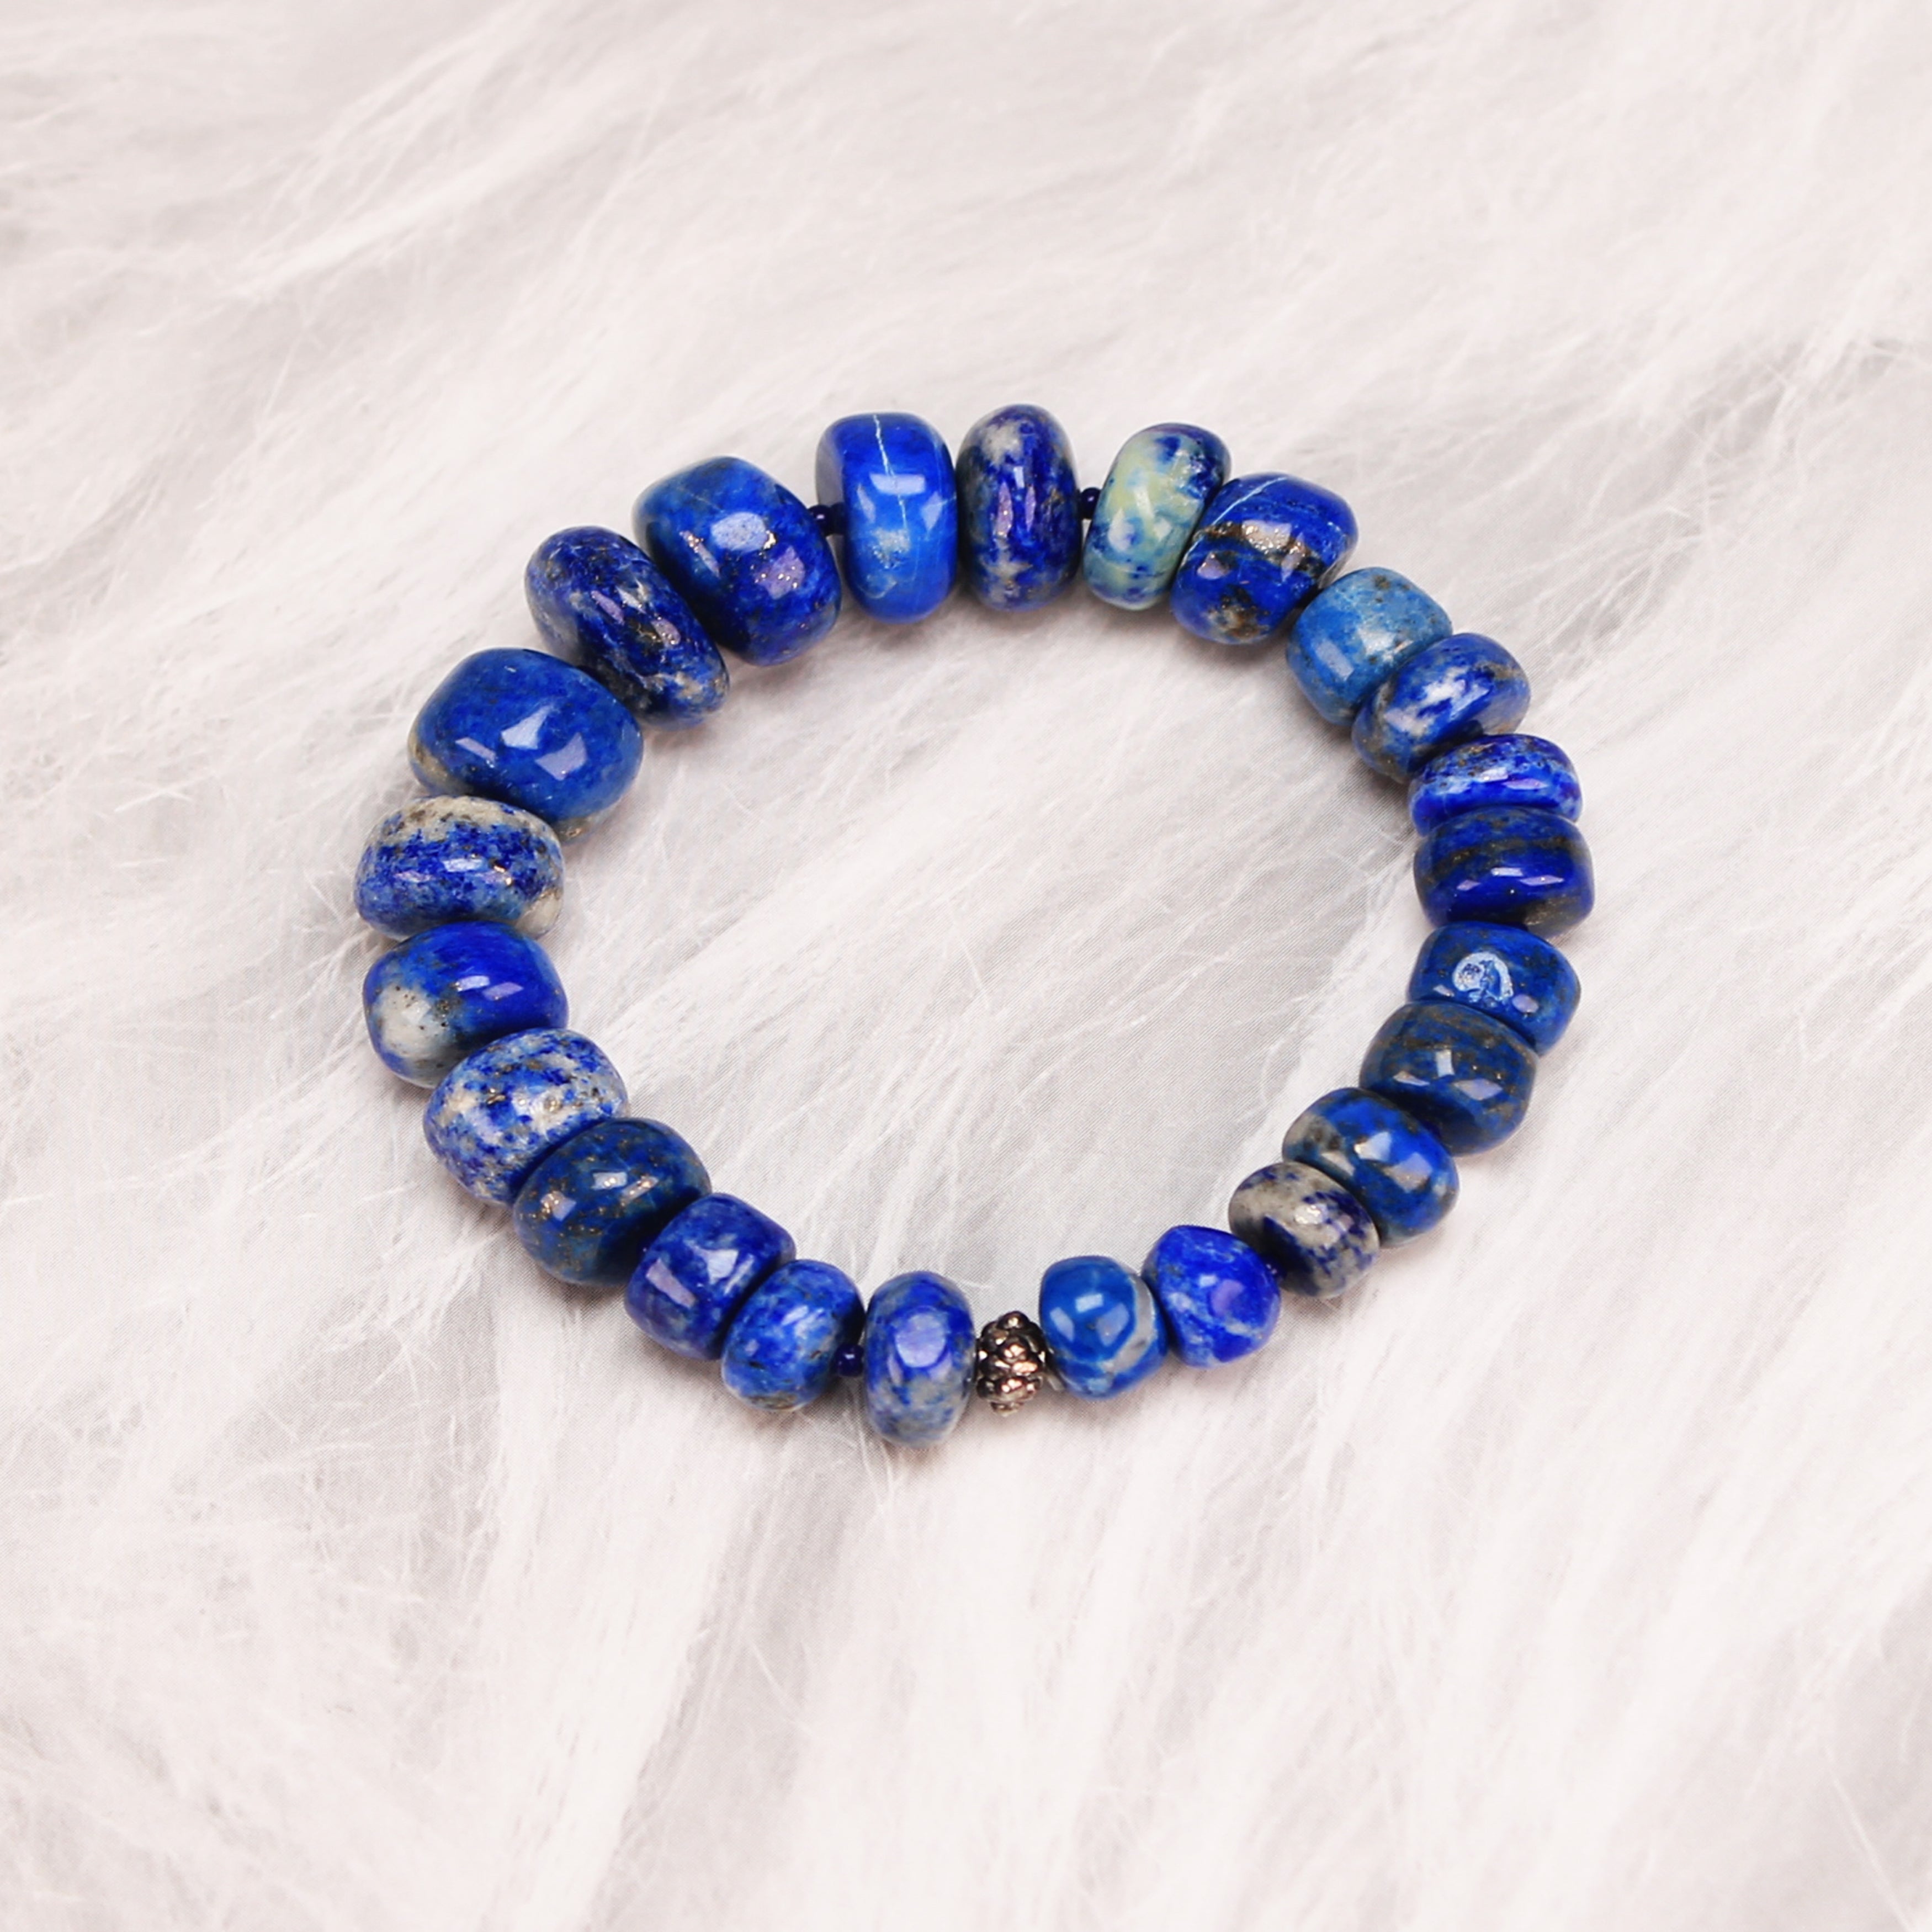 Buy Frosted Lapis Lazuli Bracelet, Lapis Lazulis Benefits Are a Powerful  Intense Blue Stone Used to Open Minds and Give Enlightenment, B235 Online  in India - Etsy